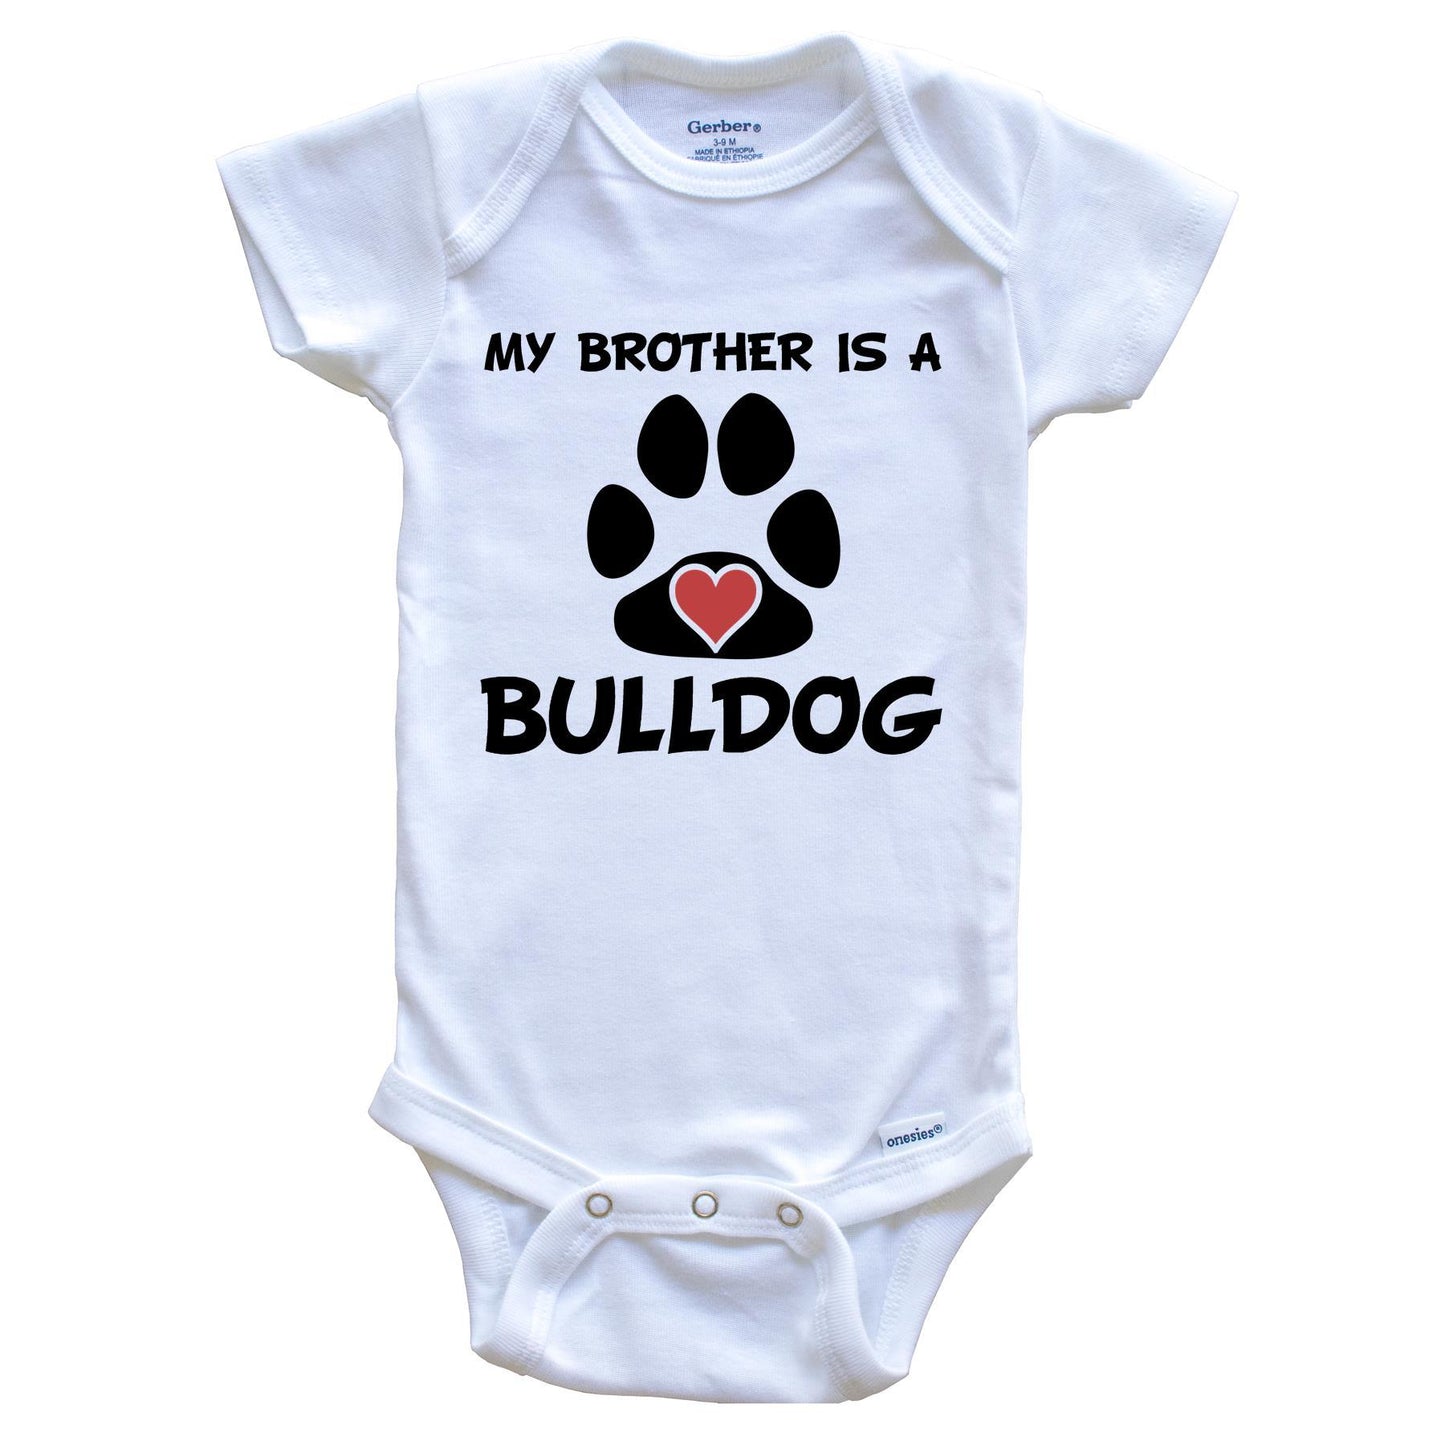 My Brother Is A Bulldog Baby Onesie